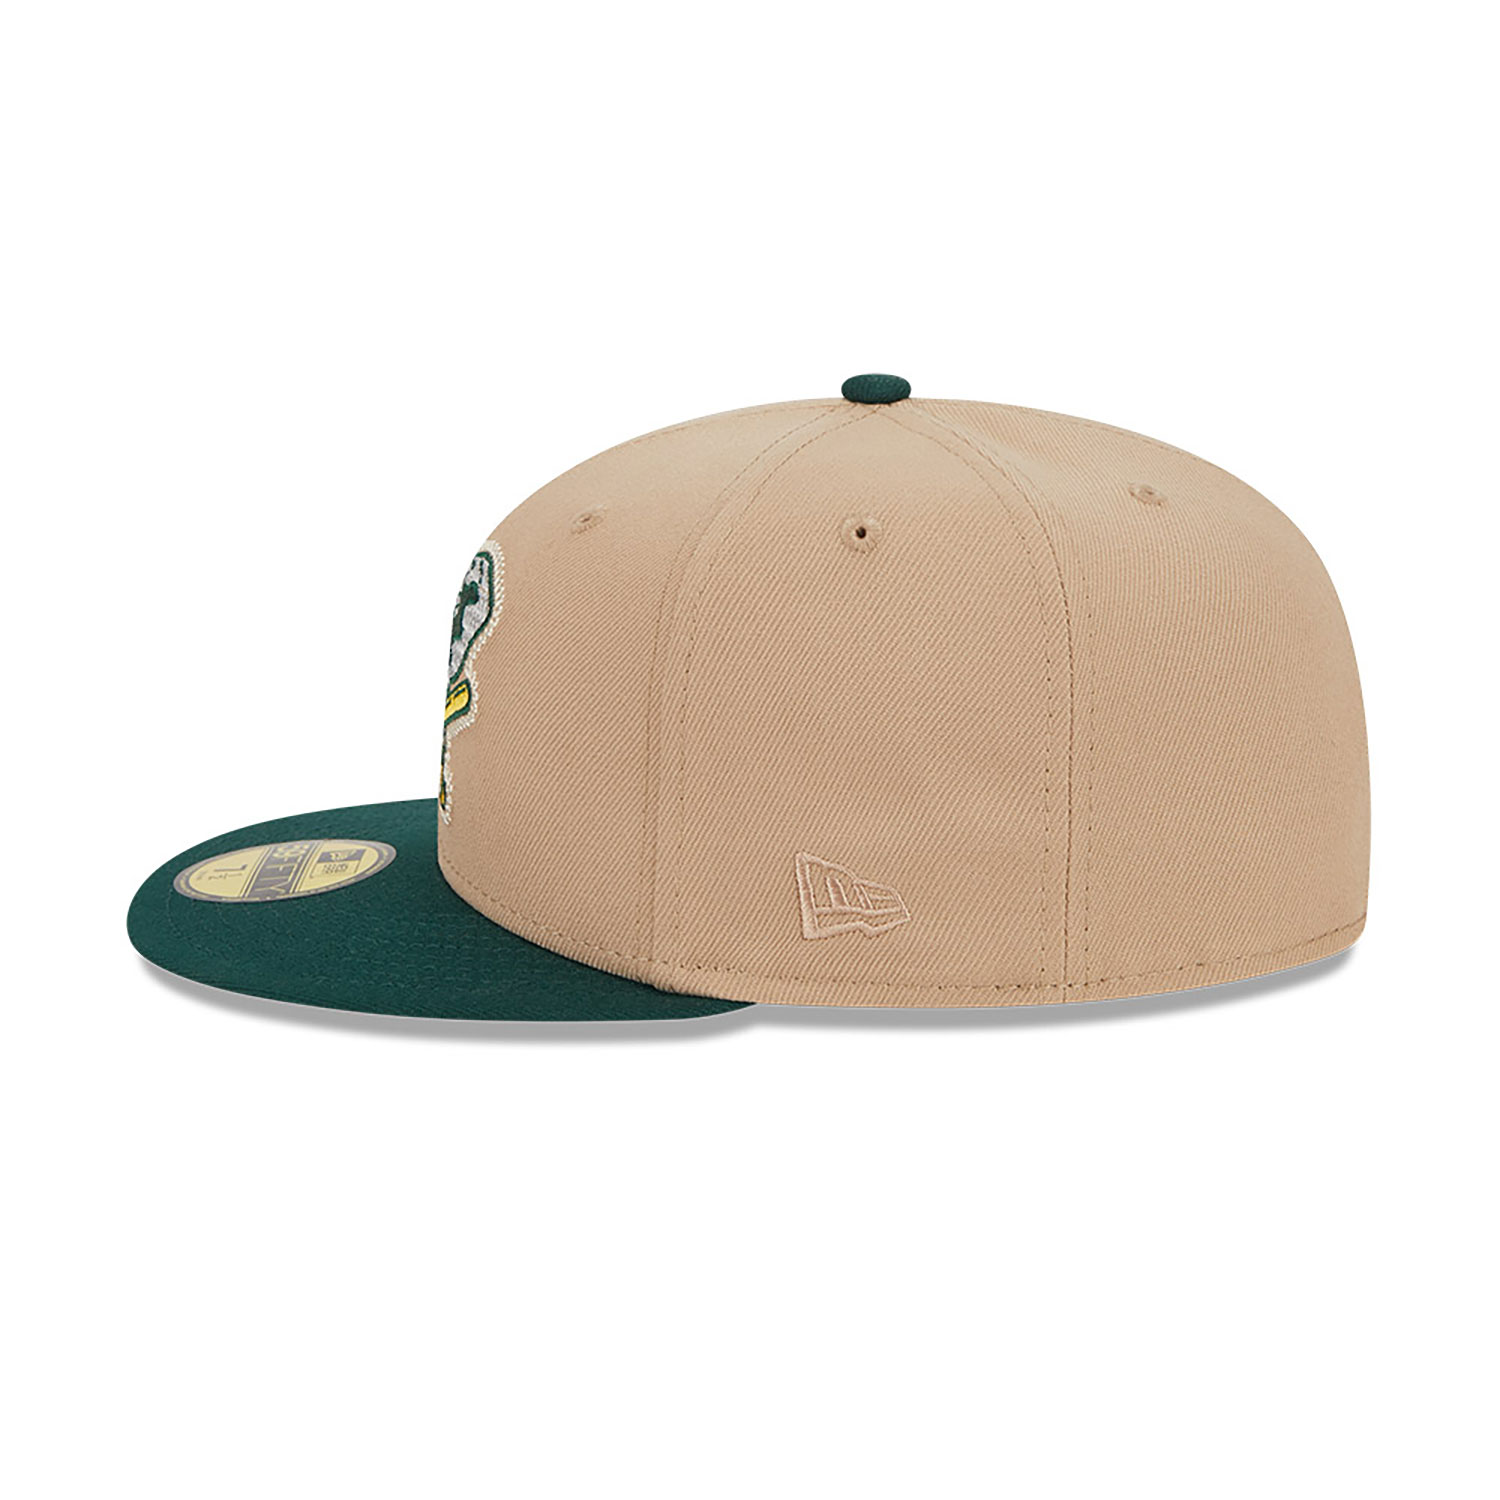 Oakland Athletics Needlepoint Light Beige 59FIFTY Fitted Cap